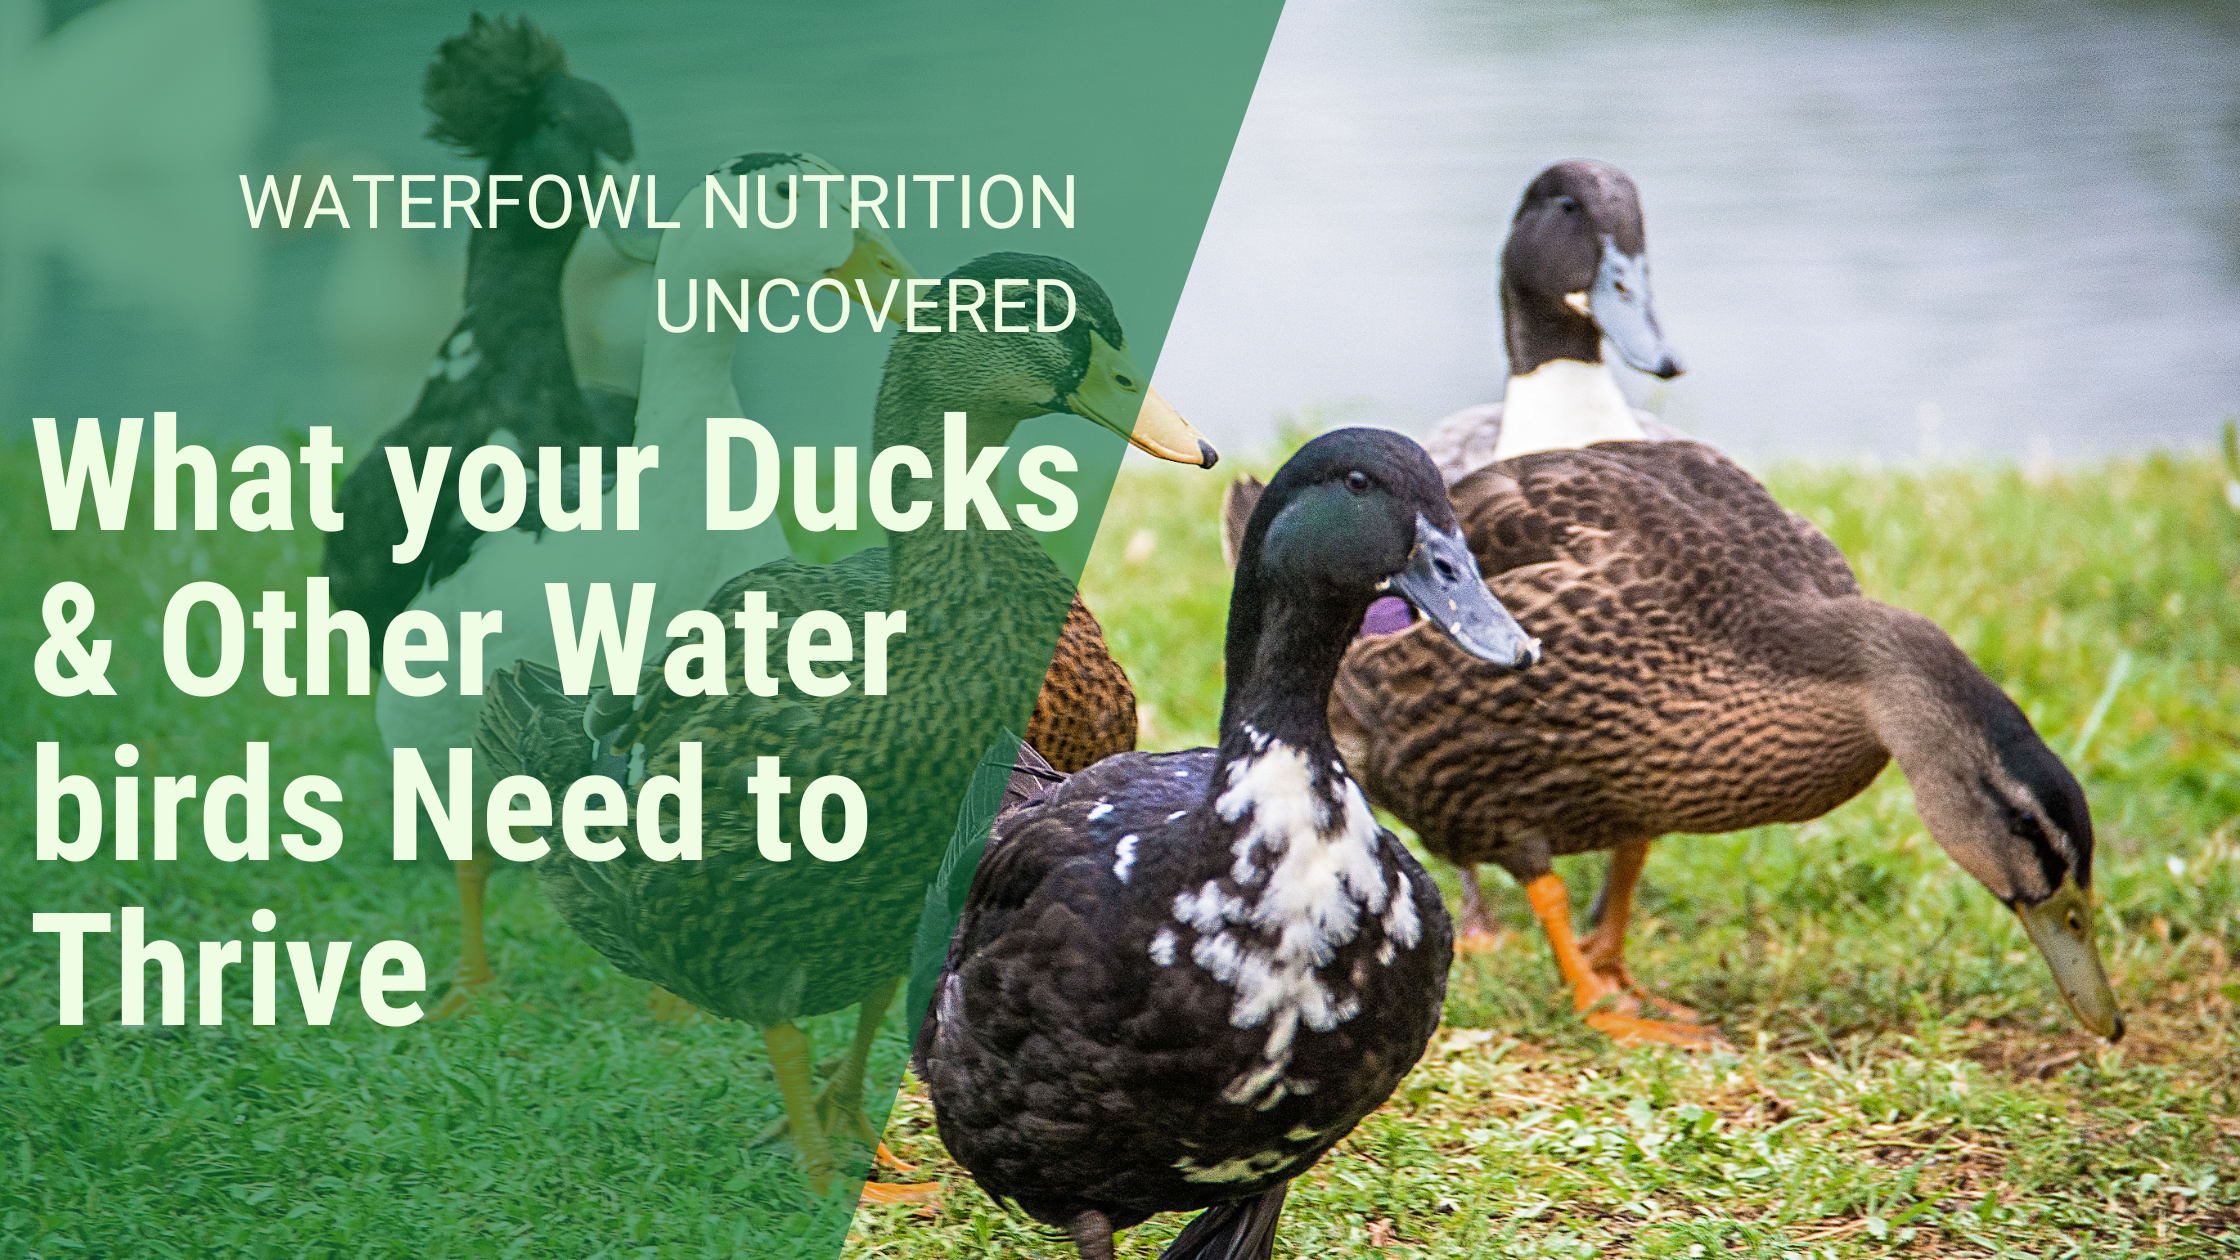 waterfowl nutrition: what your ducks and other water birds need to thrive